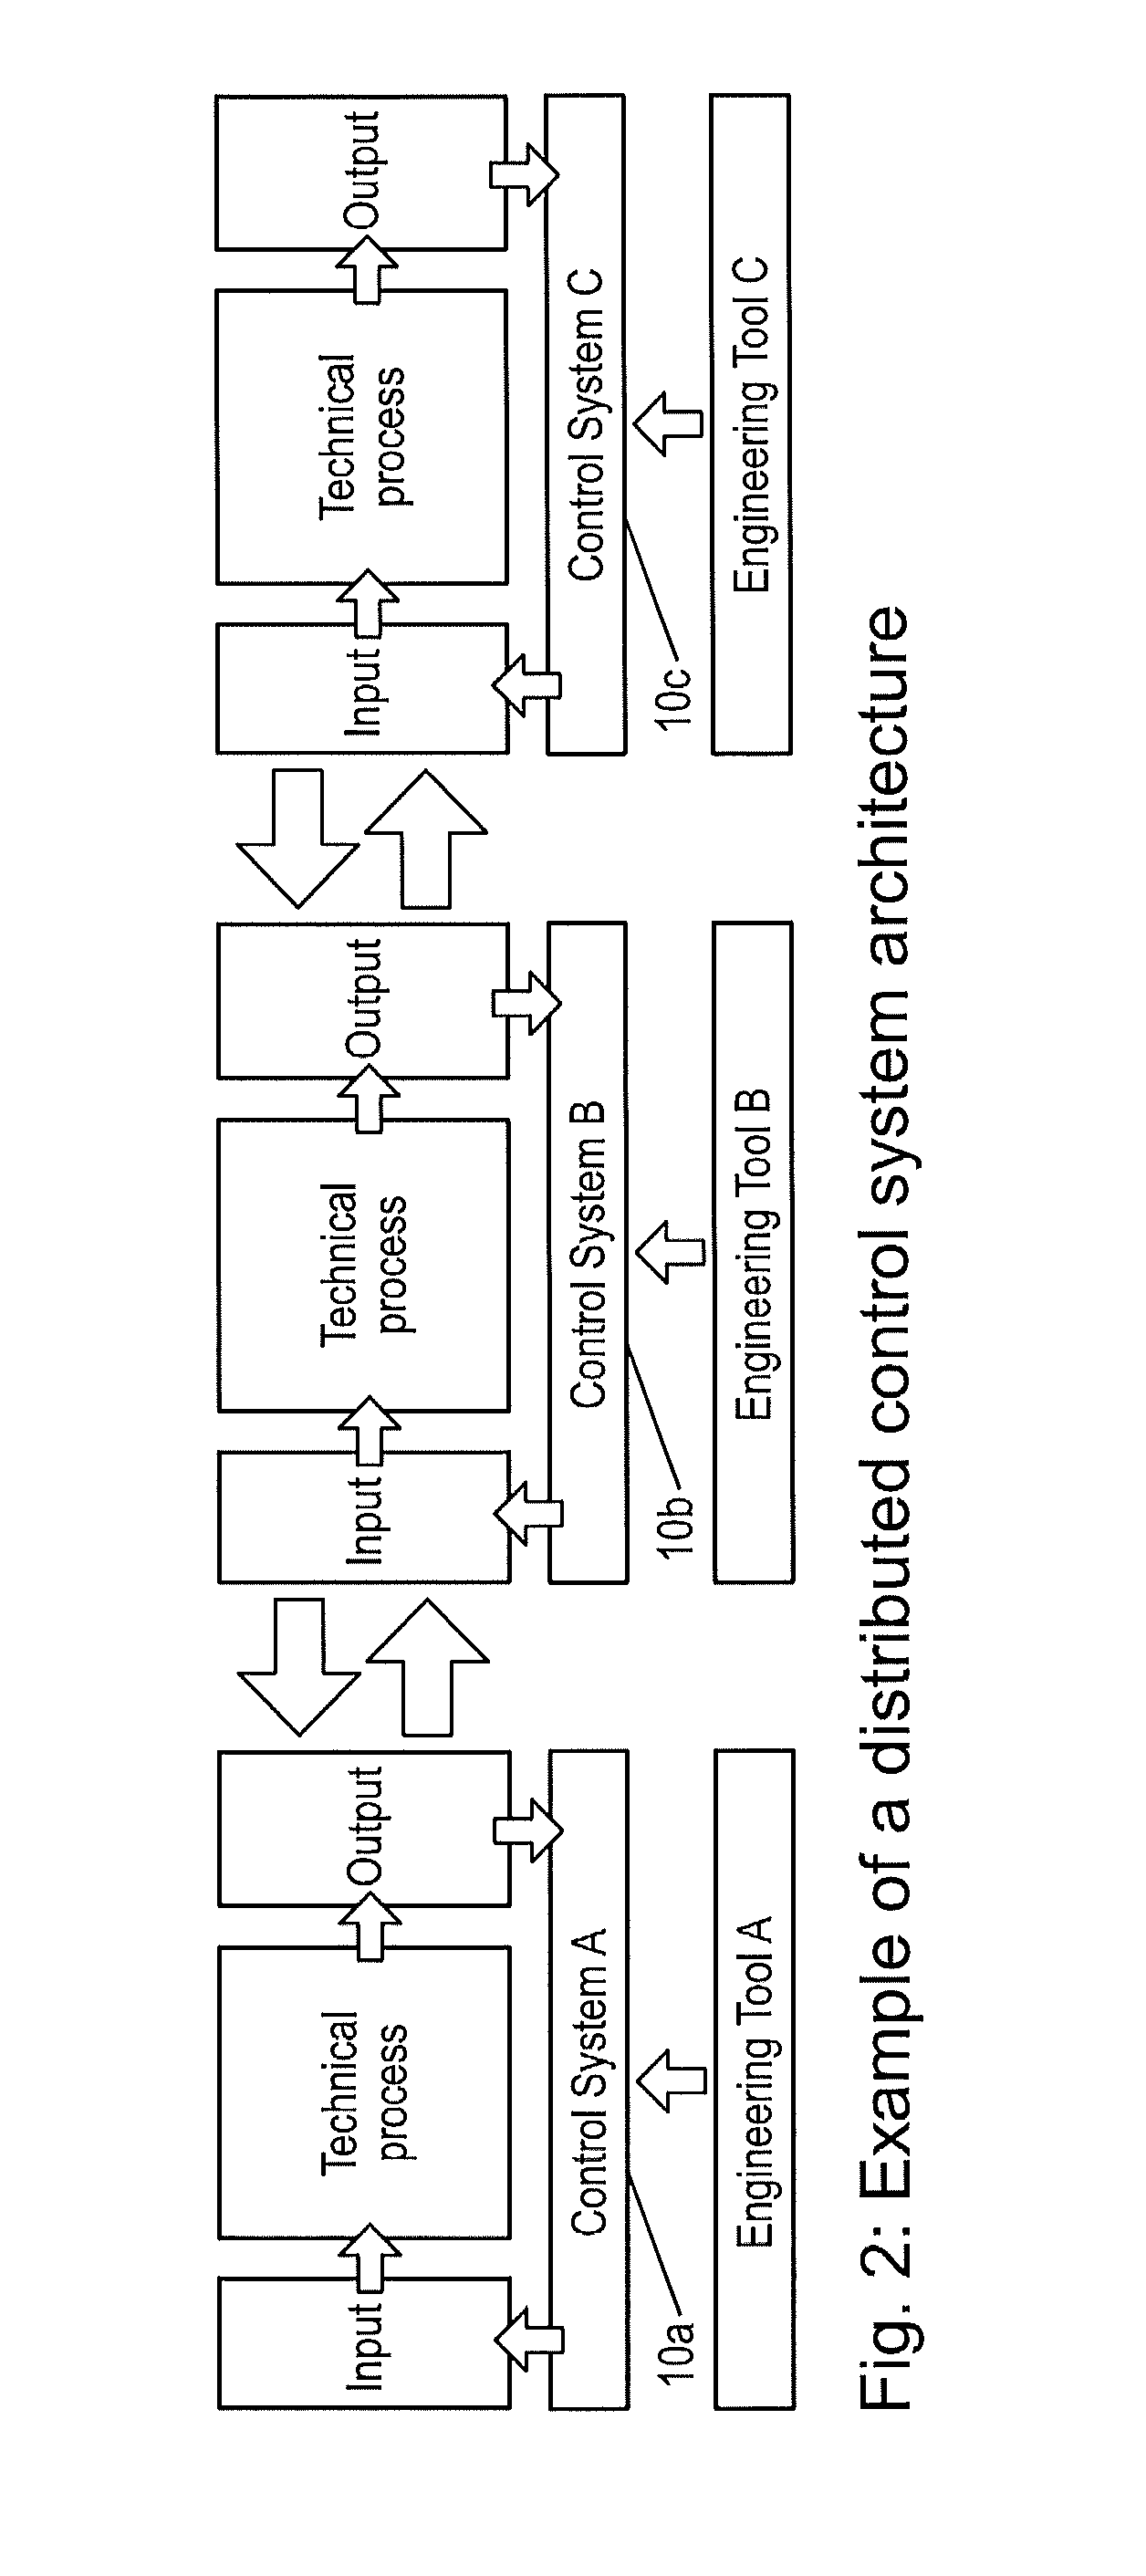 Method for debugging of process or manufacturing plant solutions comprising multiple sub-systems